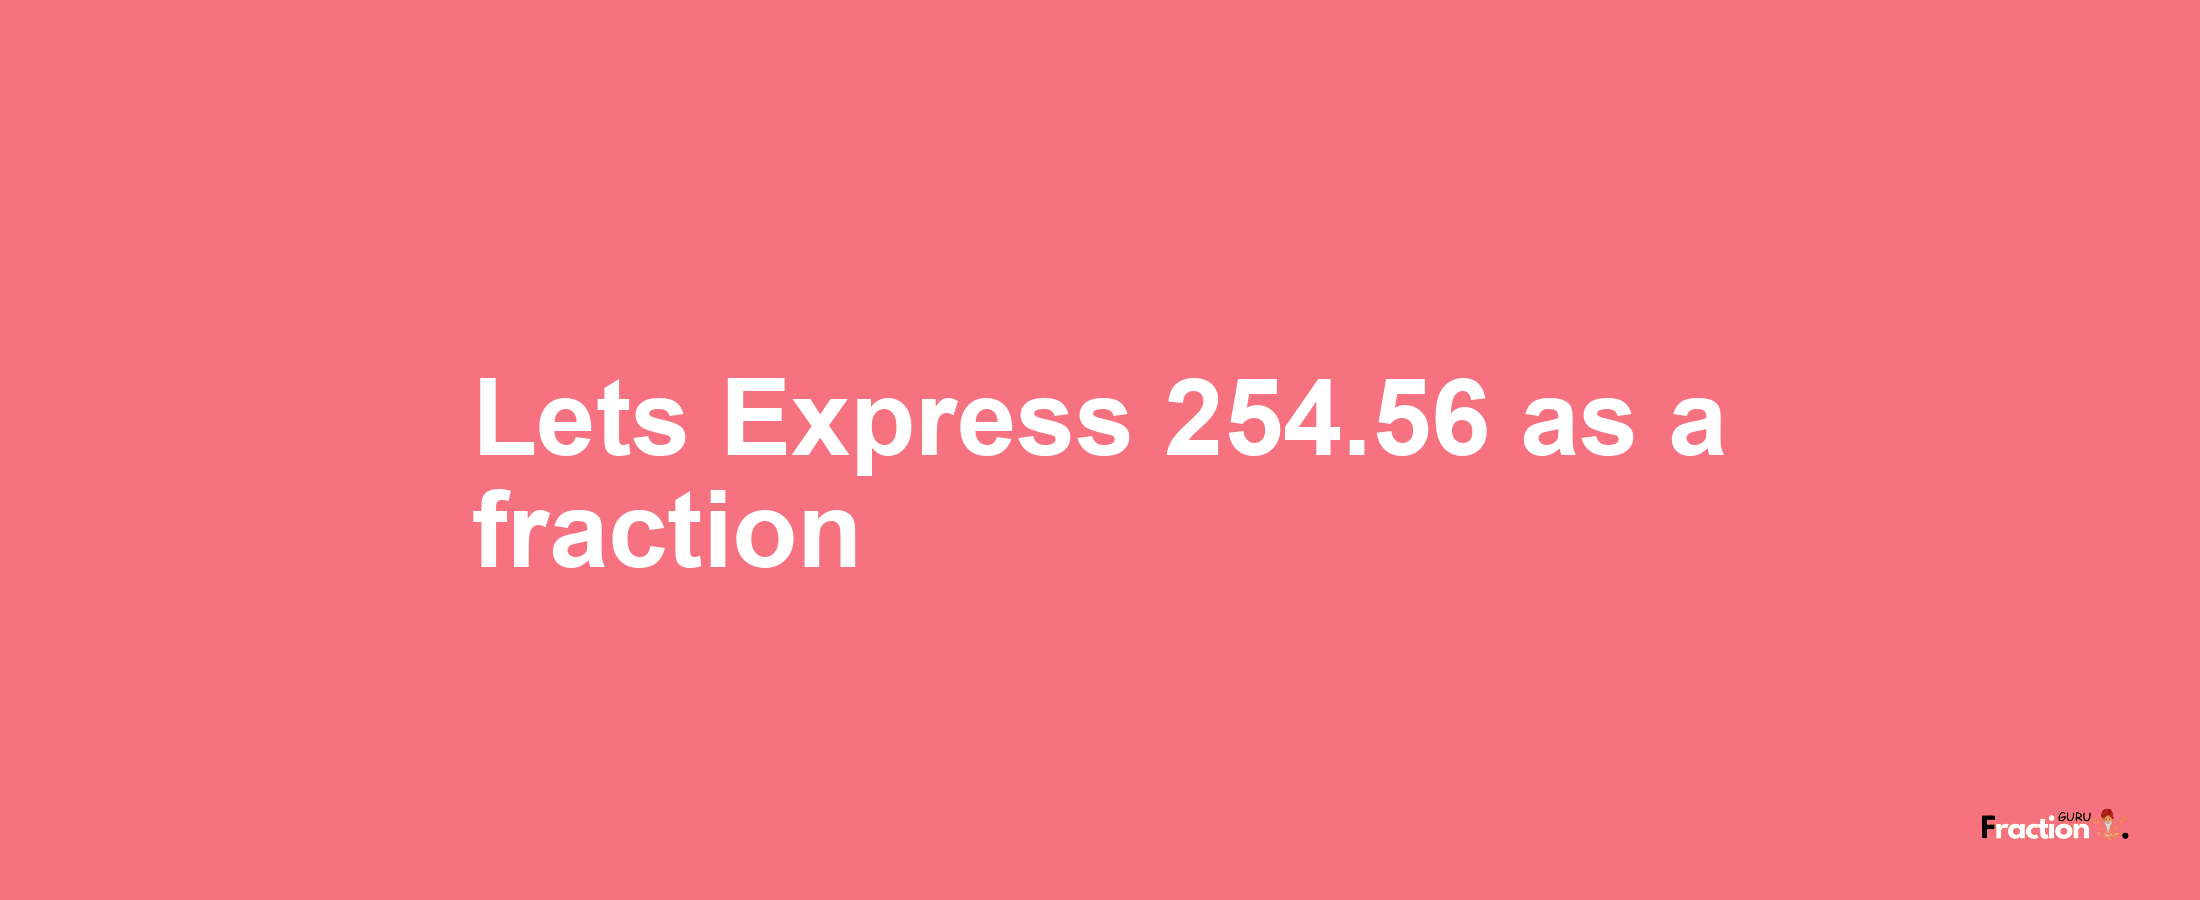 Lets Express 254.56 as afraction